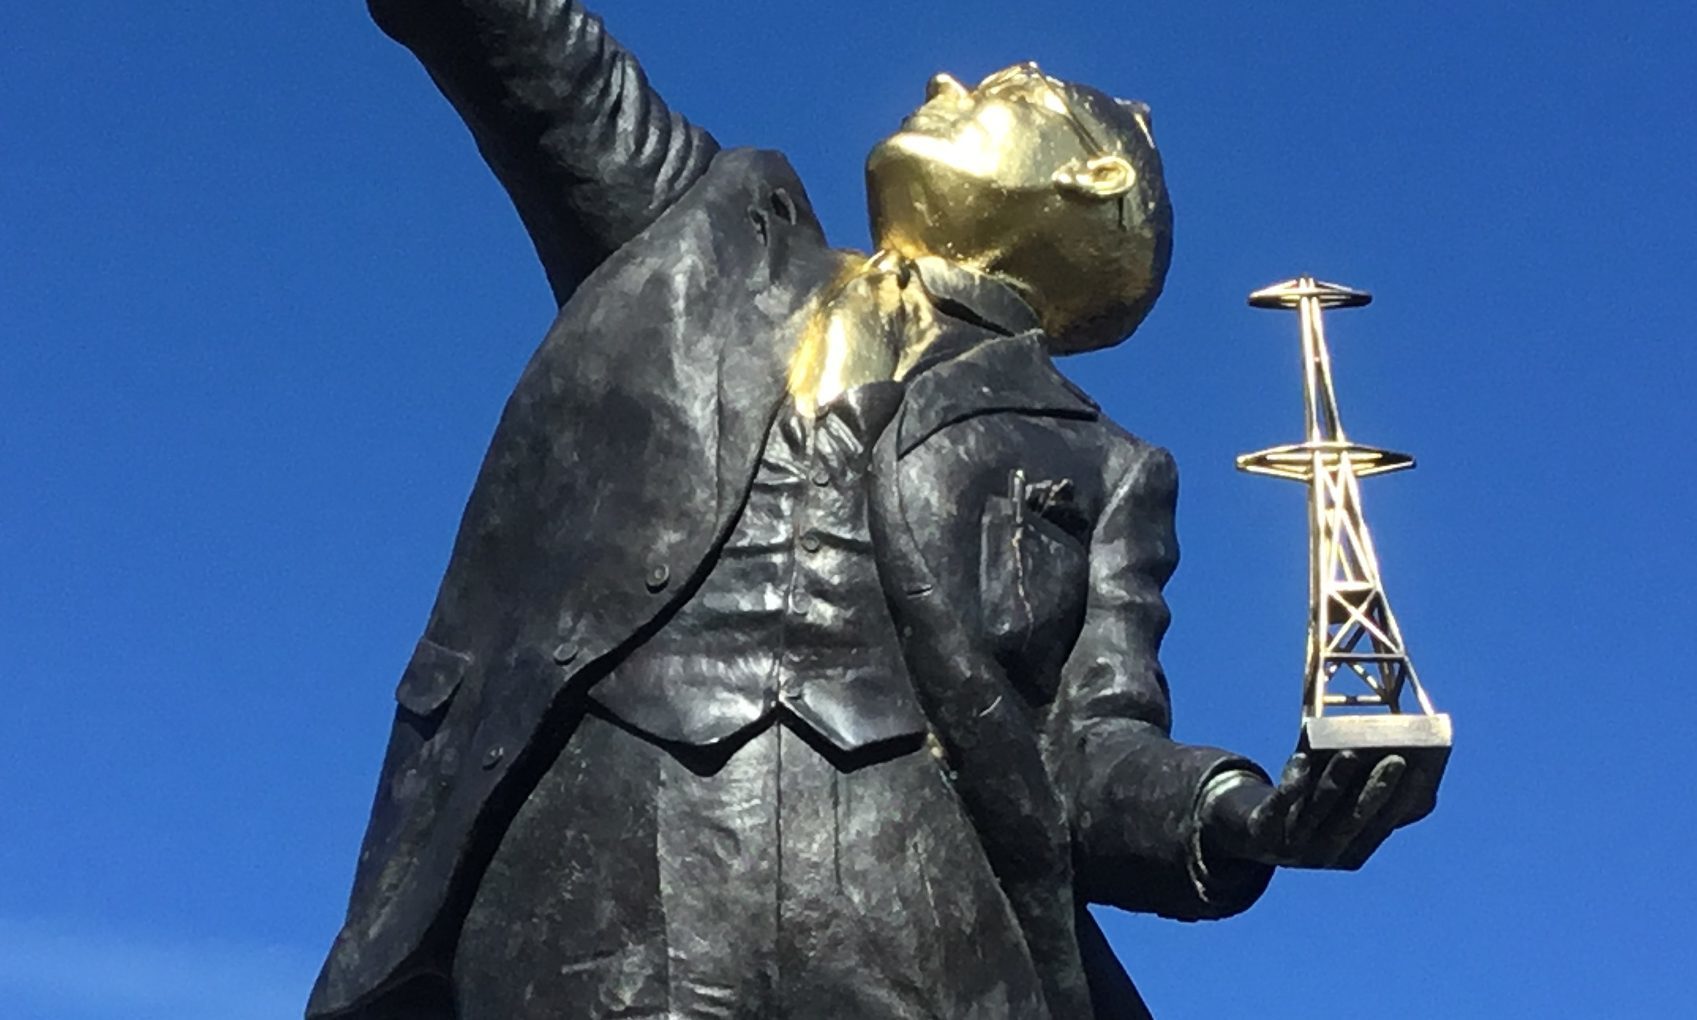 The face of the Watson Watt statue was sprayed with gold paint.